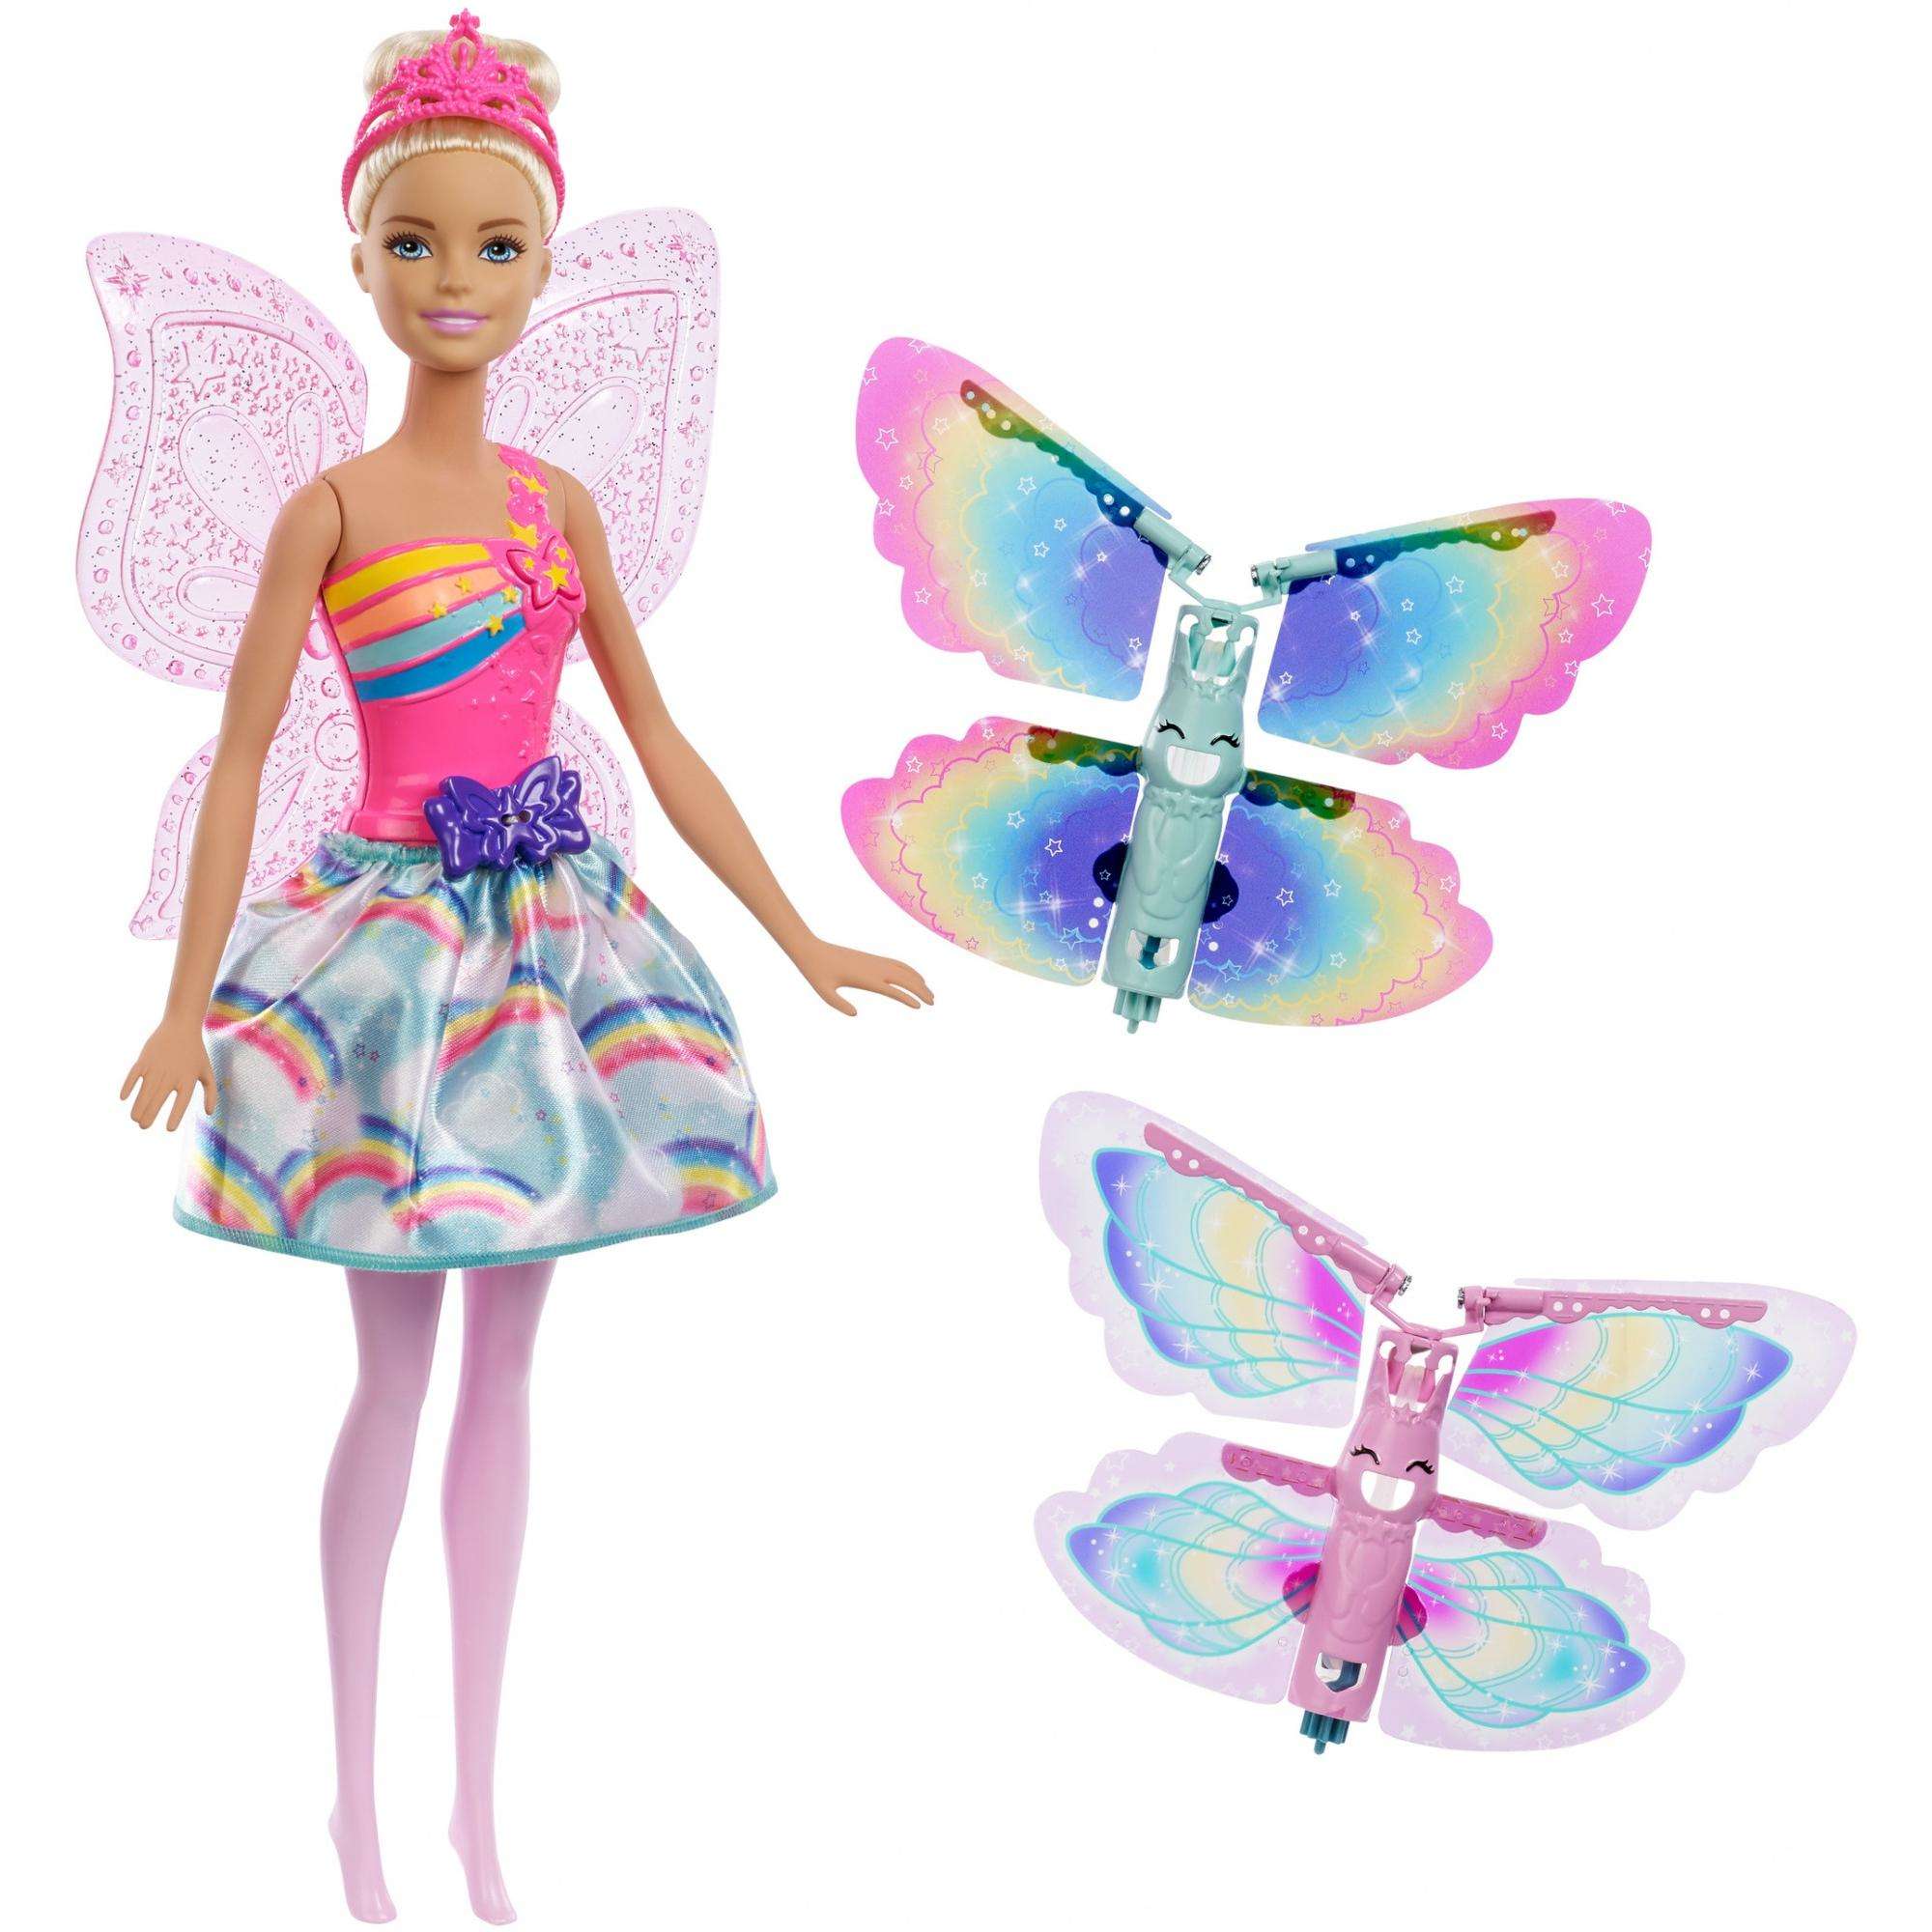 Barbie Dreamtopia Flying Wings Fairy Doll with Blonde Hair - image 1 of 11